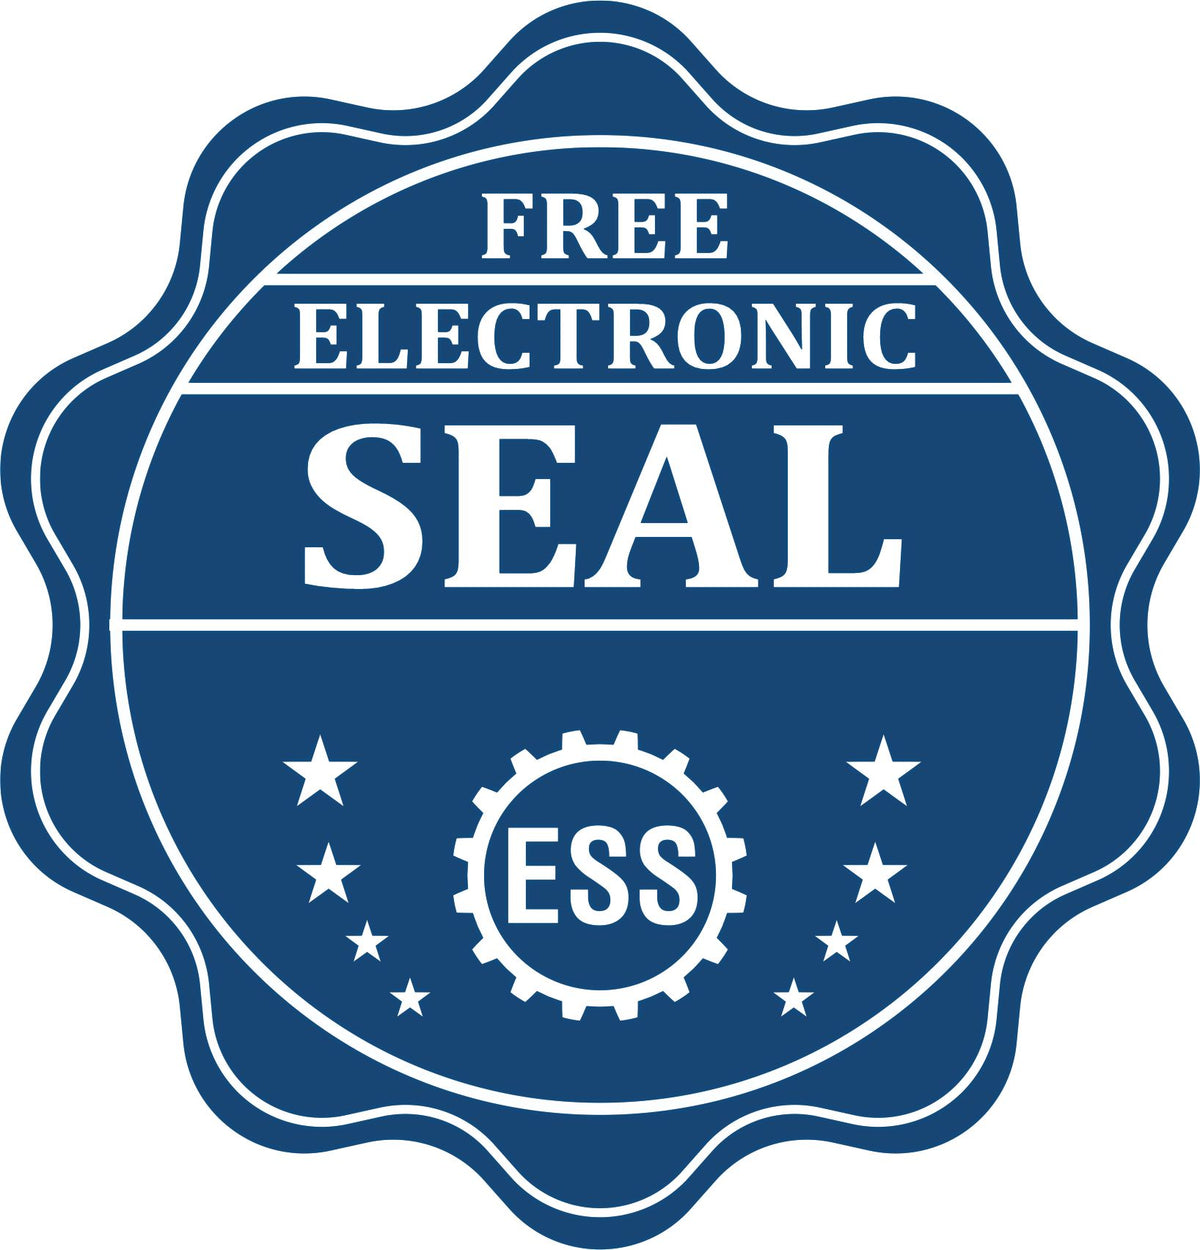 A badge showing a free electronic seal for the PSI Alabama Notary Stamp with stars and the ESS gear on the emblem.